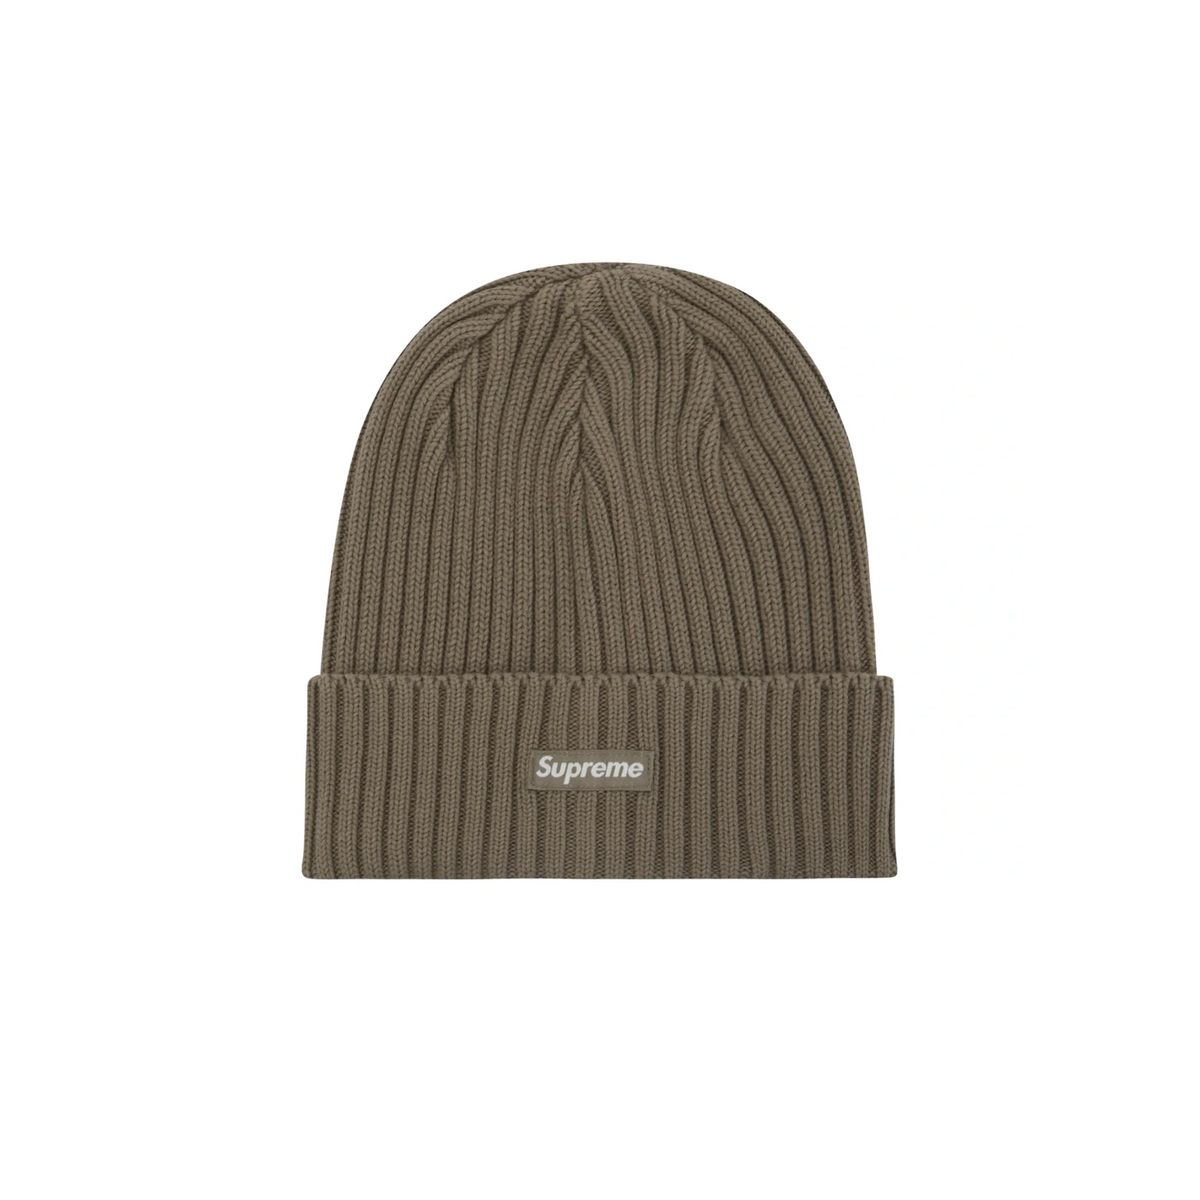 Supreme Overdyed Beanie "Taupe"